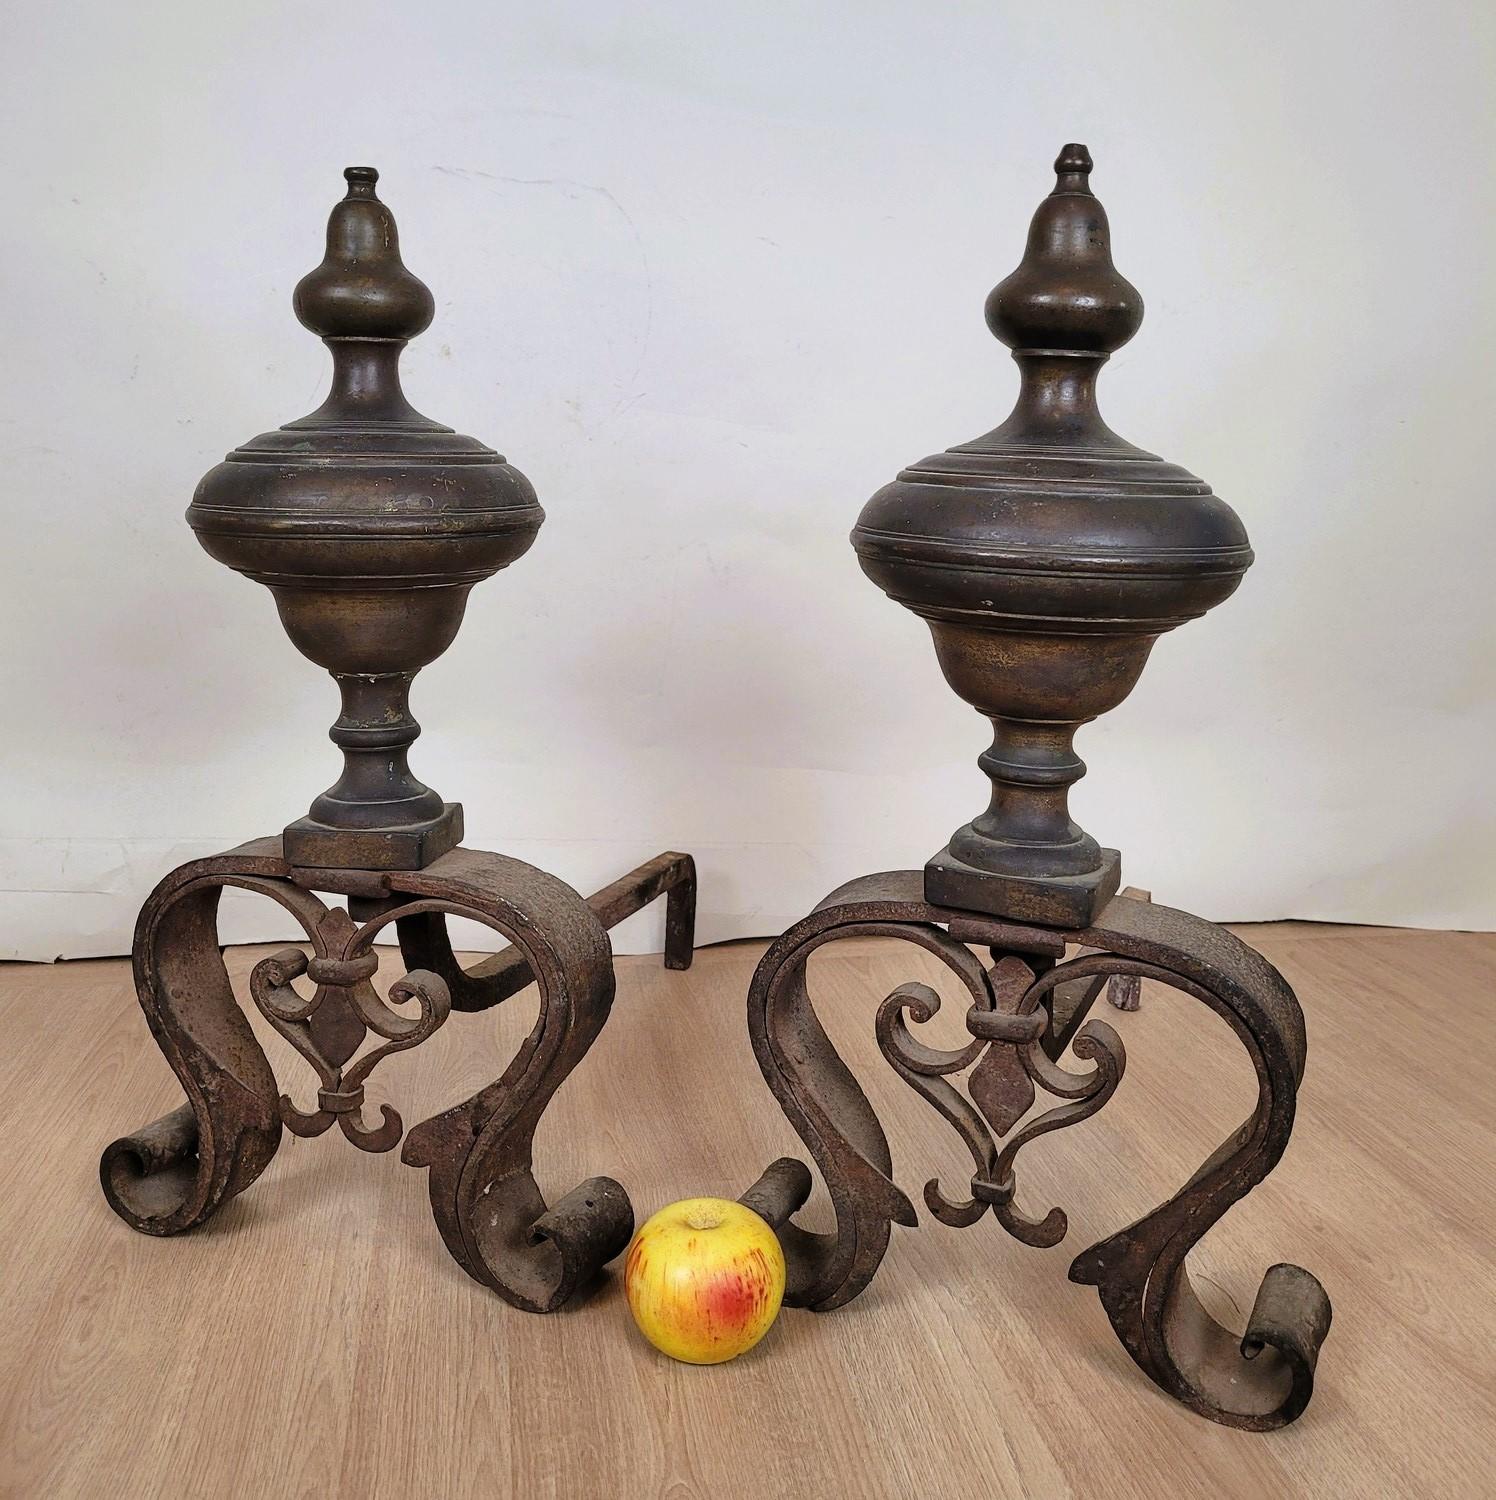 Pair of bronze and wrought iron andirons, in the style of the 17th Century

19th century period

good condition

Height 57 cm
53 x 28 cm